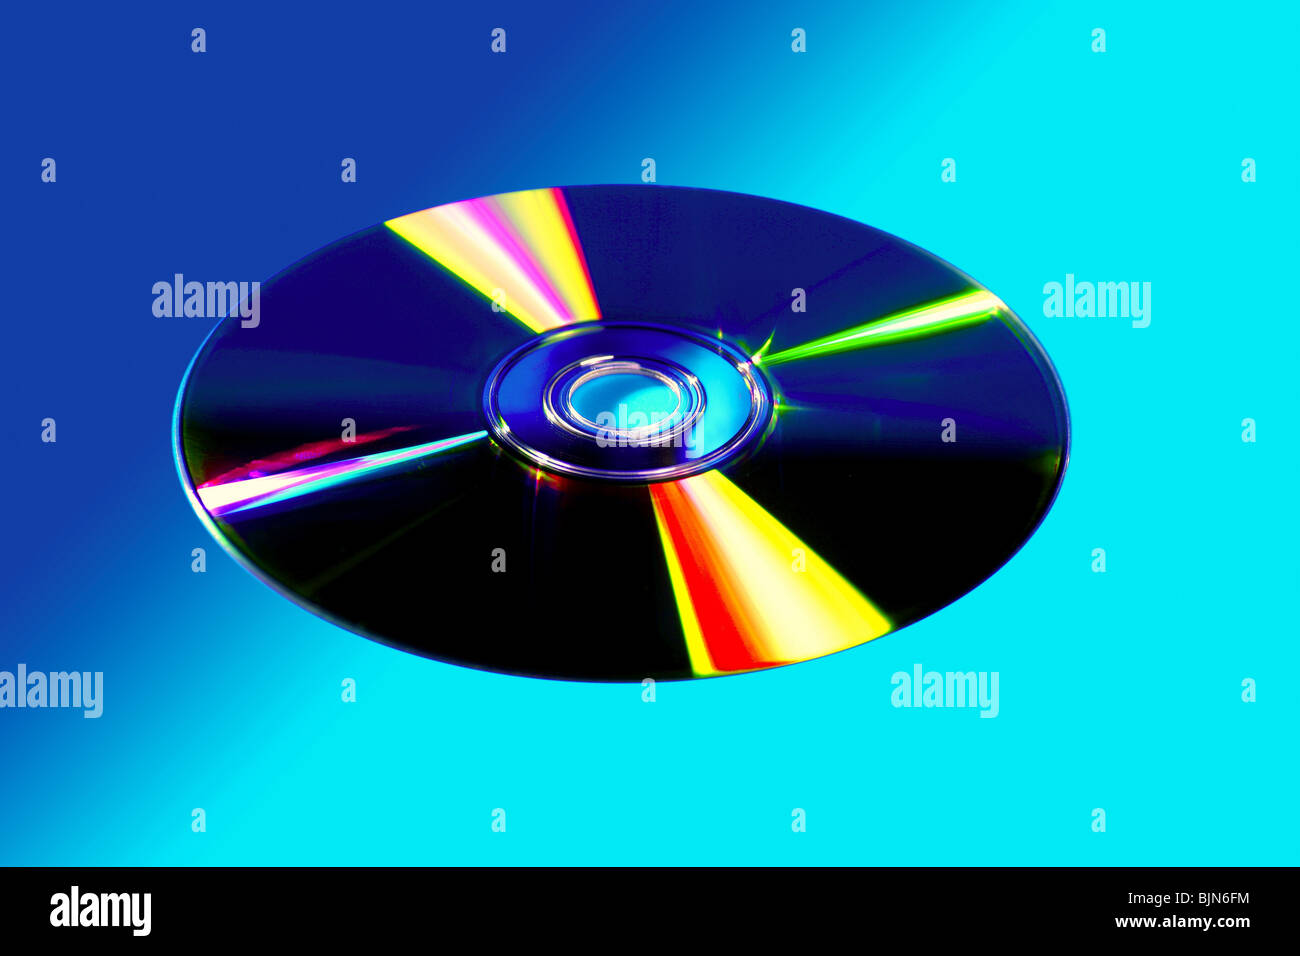 CD DVD disk with colorful reflexion over vivid blue background Stock Photo